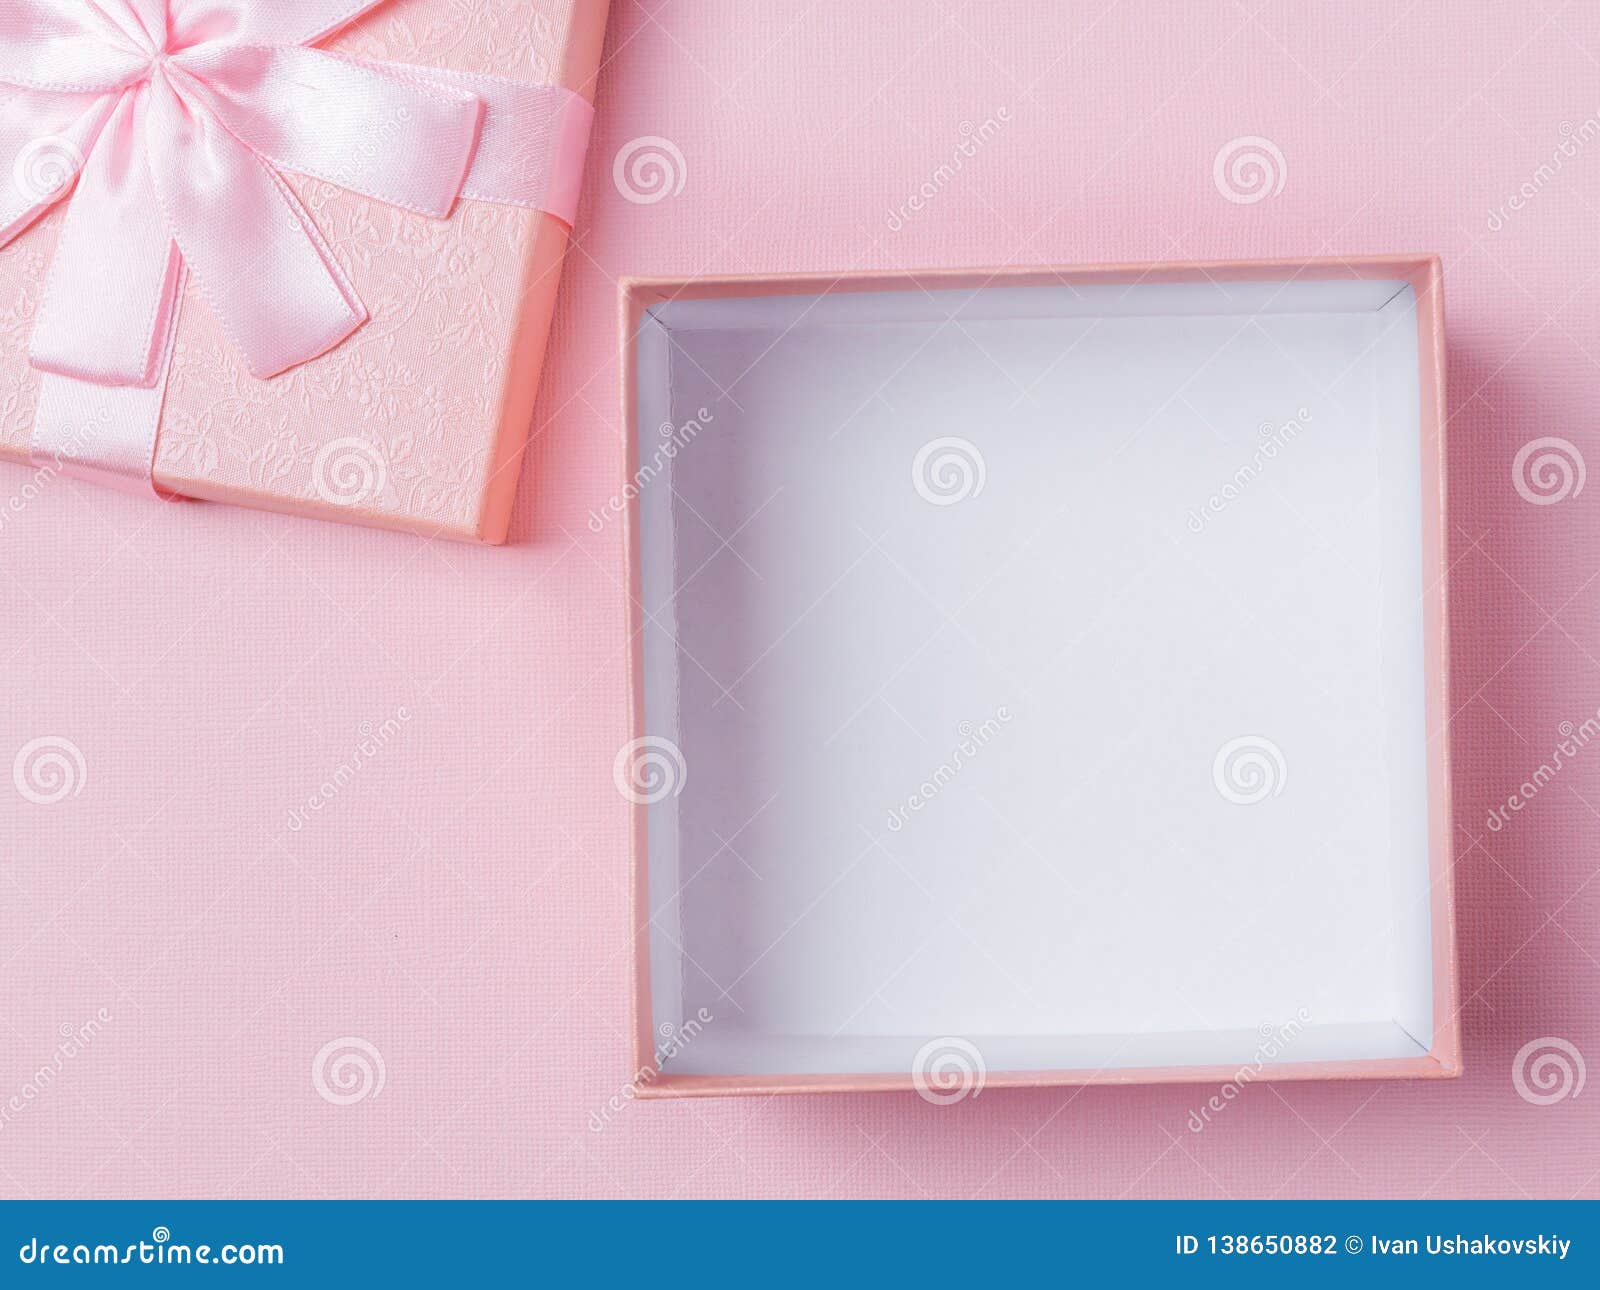 Download Opened Empty Pink Gift Box Mockup Stock Photo - Image of ...